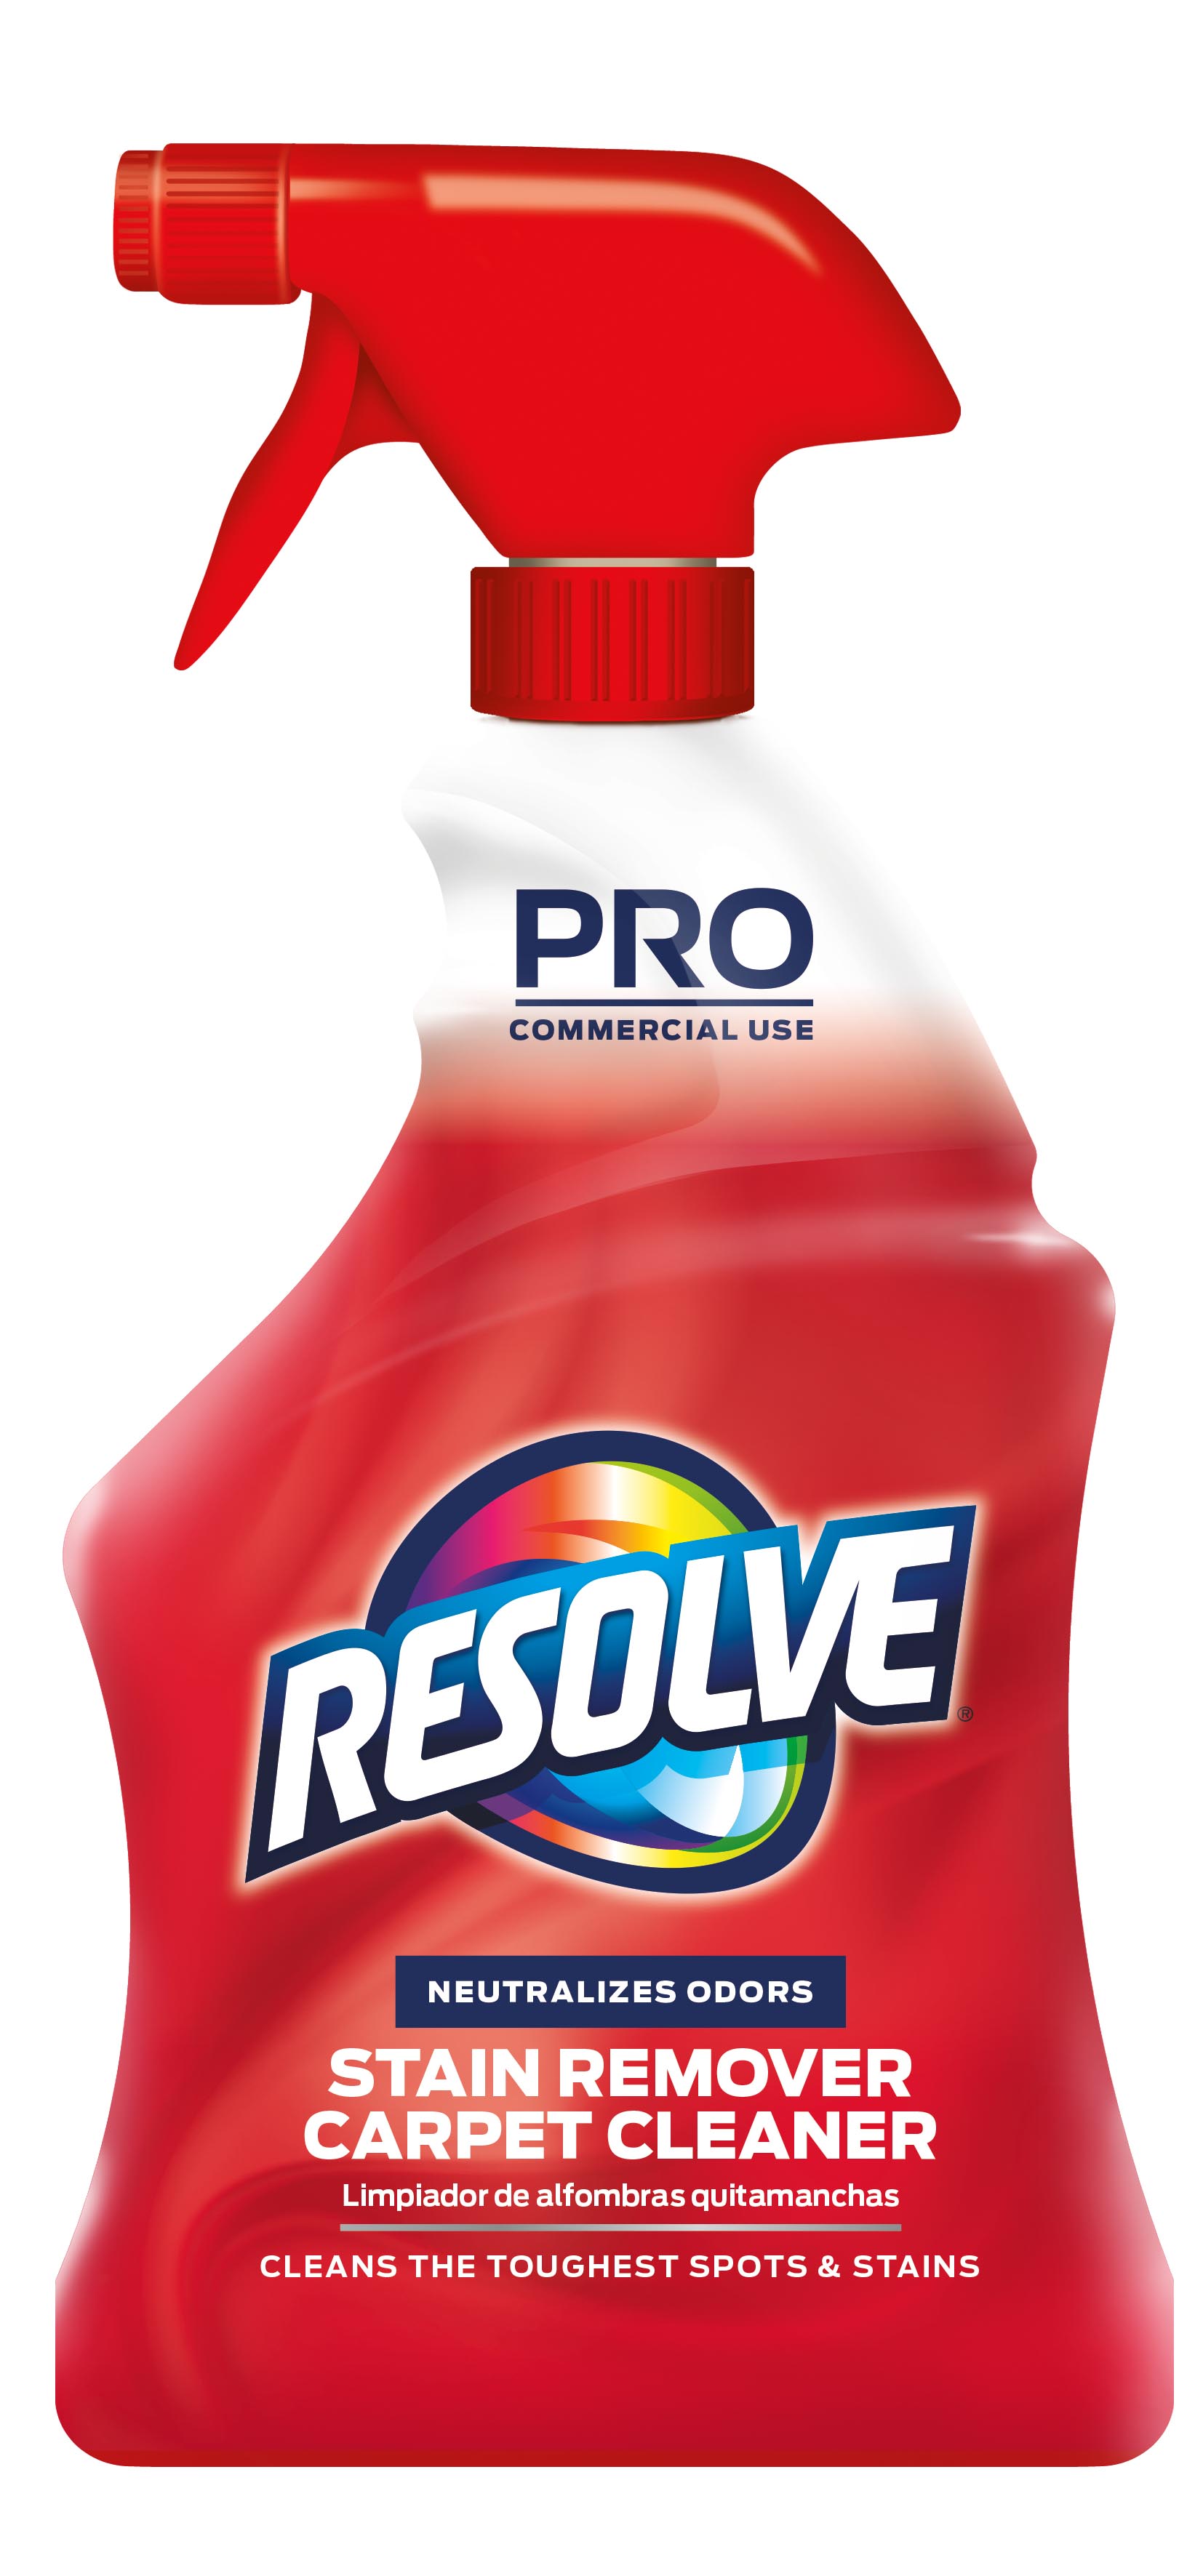 Professional RESOLVE Stain Remover Carpet Cleaner